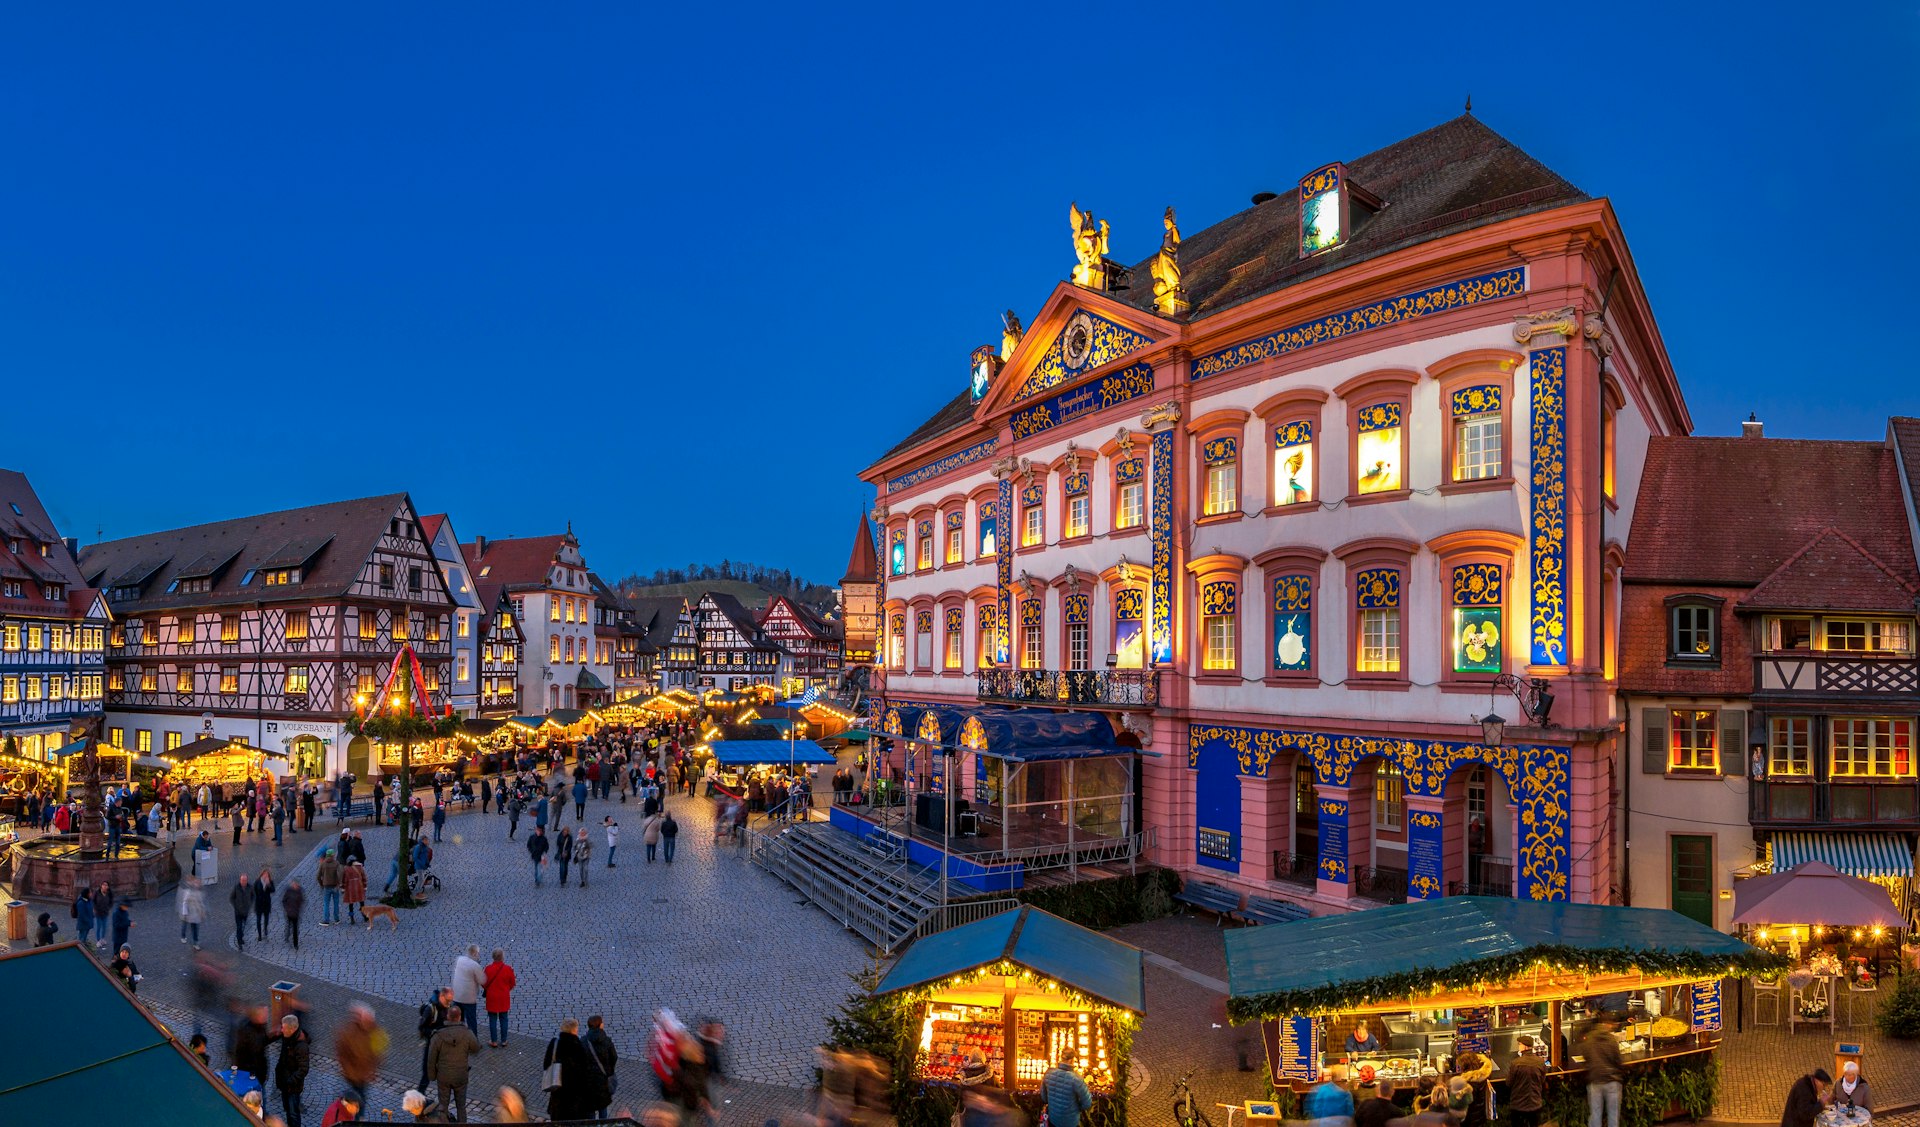 The Christmas market in Gengenbach, Germany